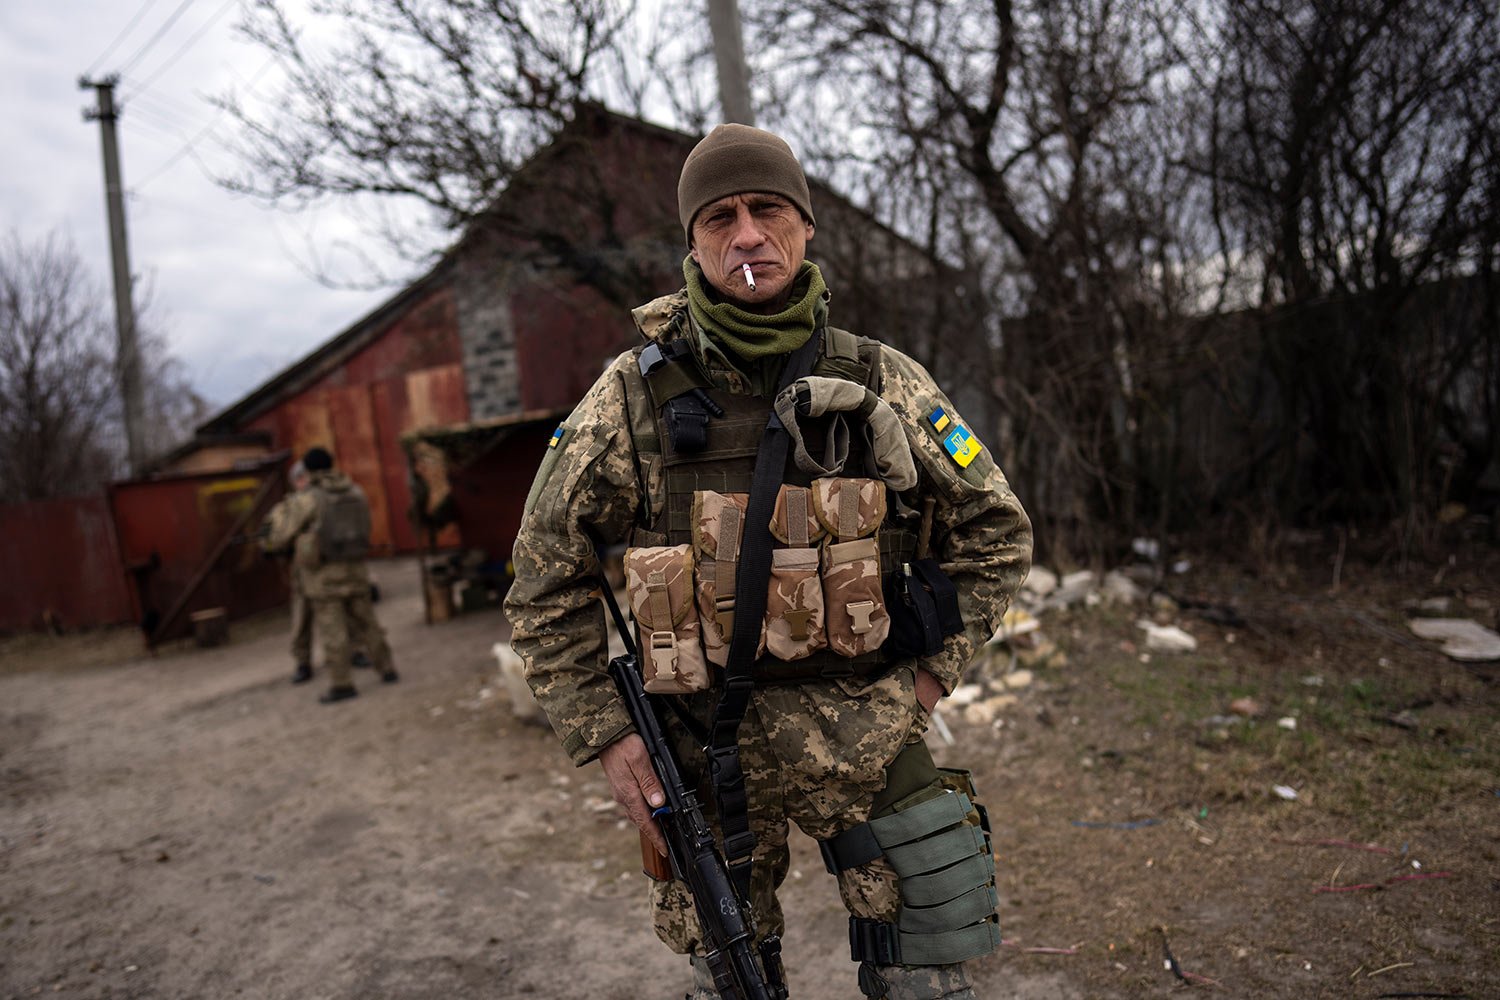  A soldier smokes a cigarette near the frontline in Brovary, on the outskirts of Kyiv, Ukraine, Monday, March 28, 2022. (AP Photo/Rodrigo Abd) 